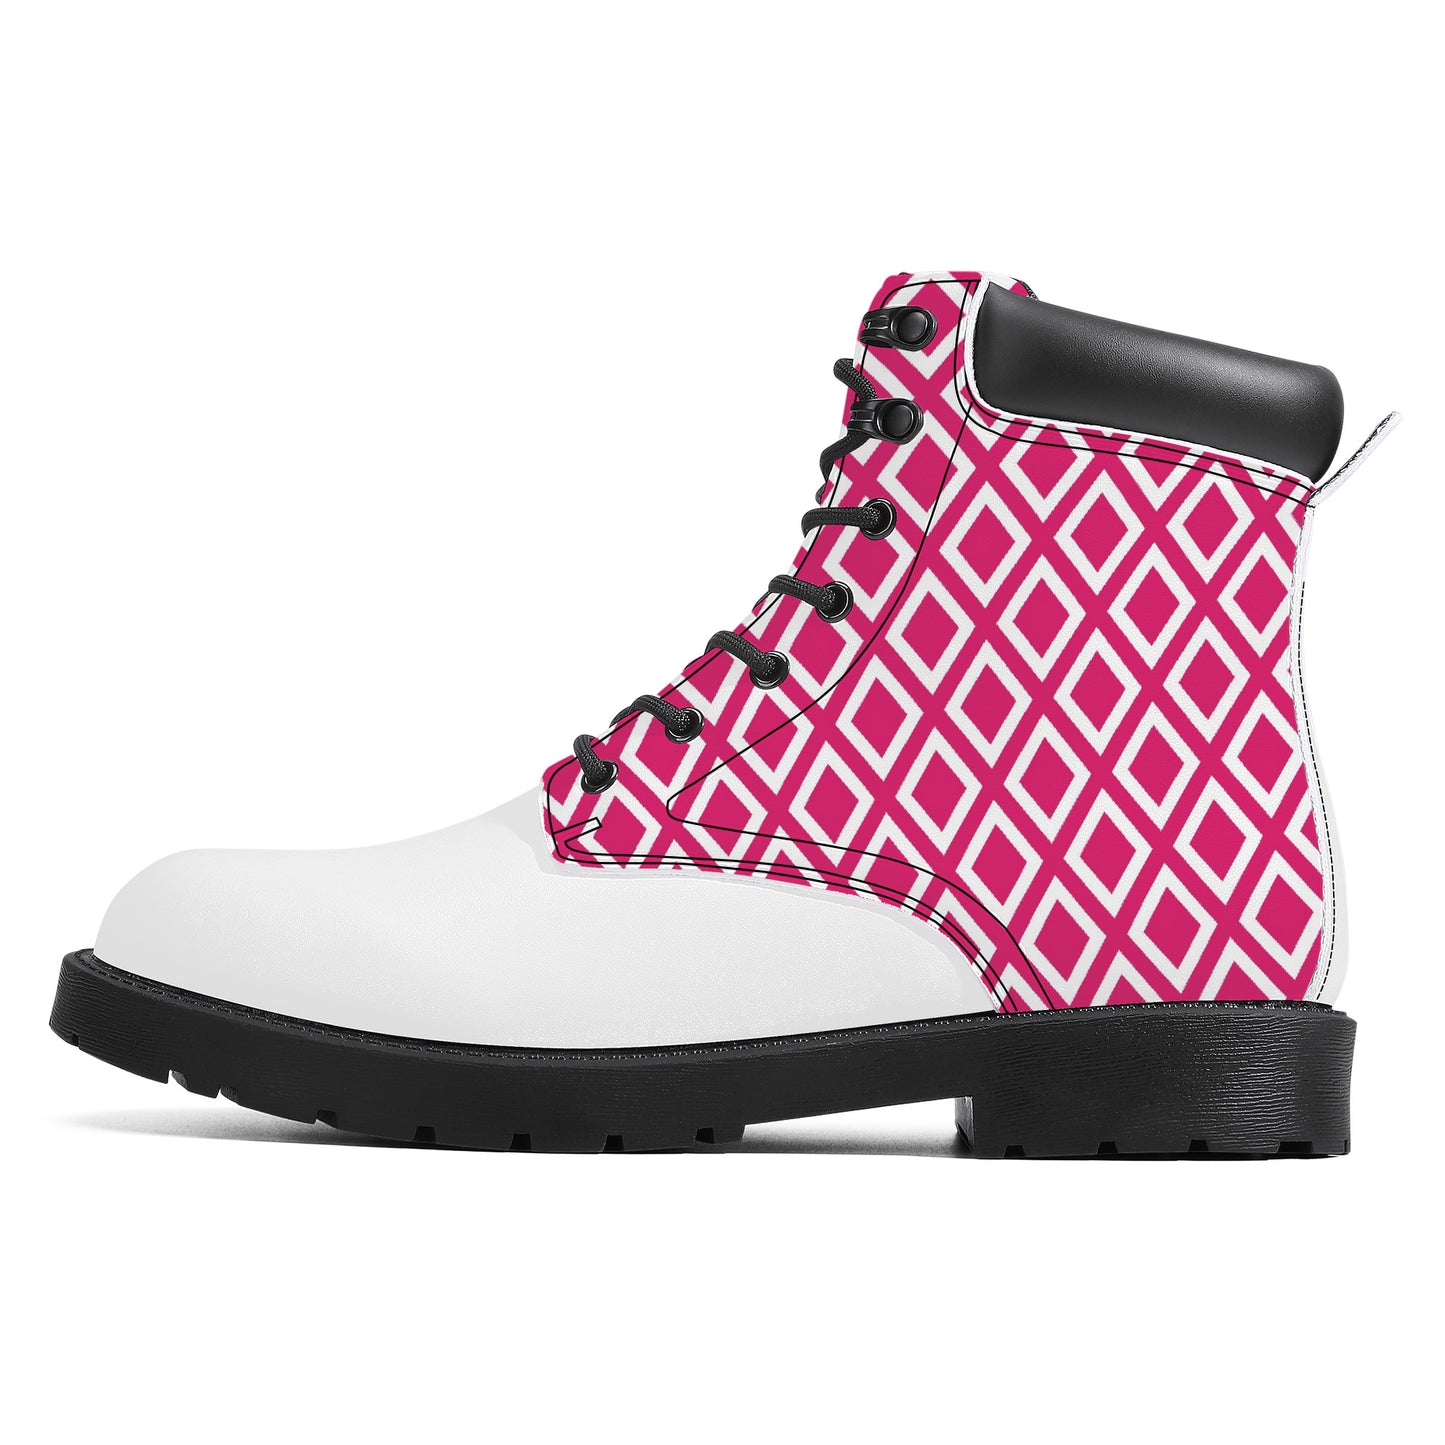 Unisex Synthetic Leather Boots With Cuff - Pink Triangles